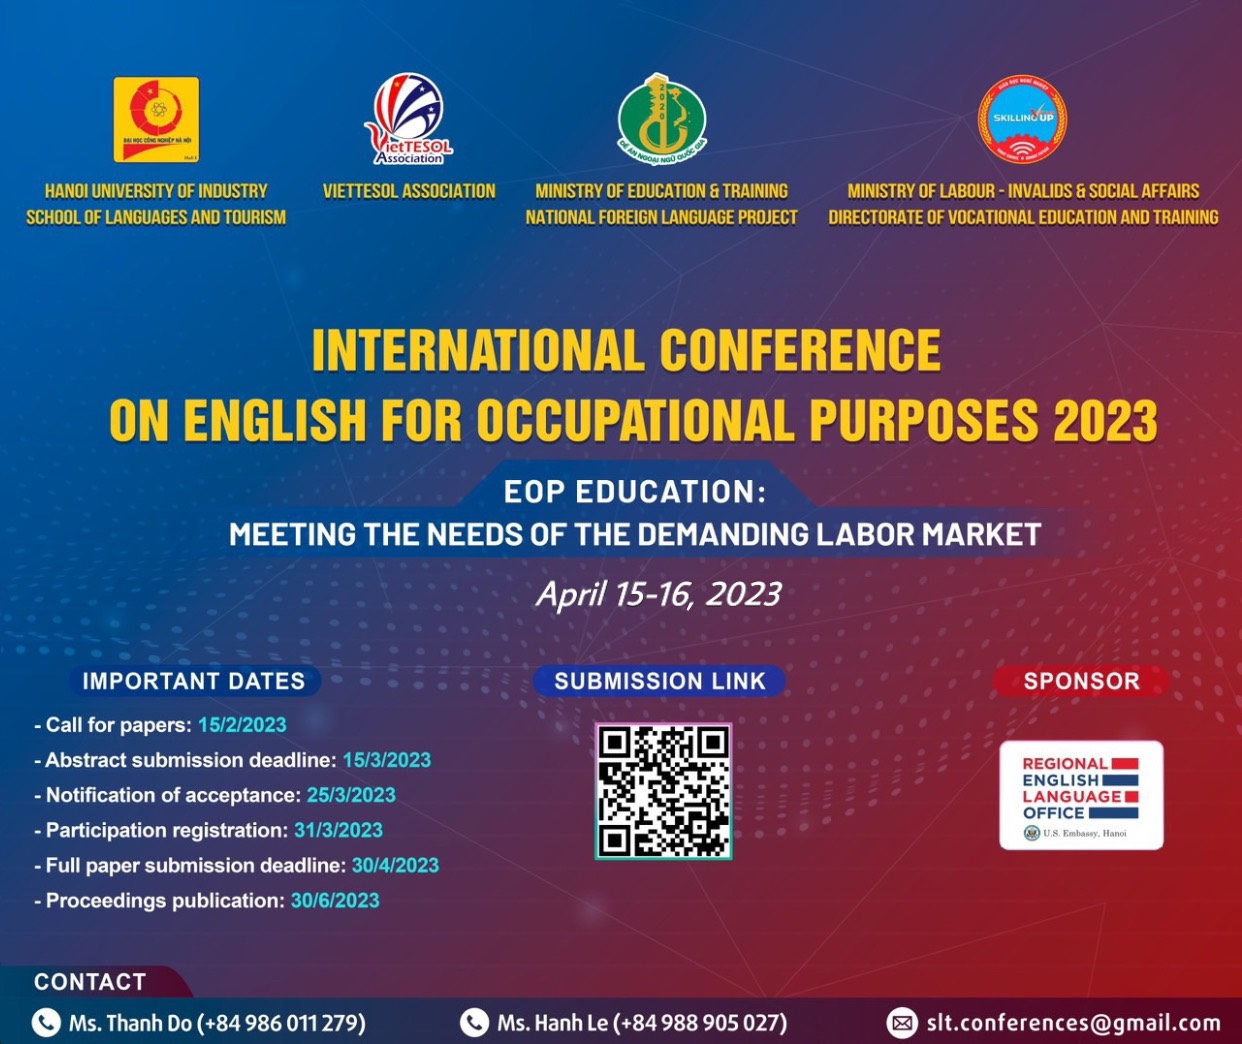 INTERNATIONAL CONFERENCE  ON ENGLISH FOR OCCUPATIONAL PURPOSES 2023 "CALL FOR PAPERS"